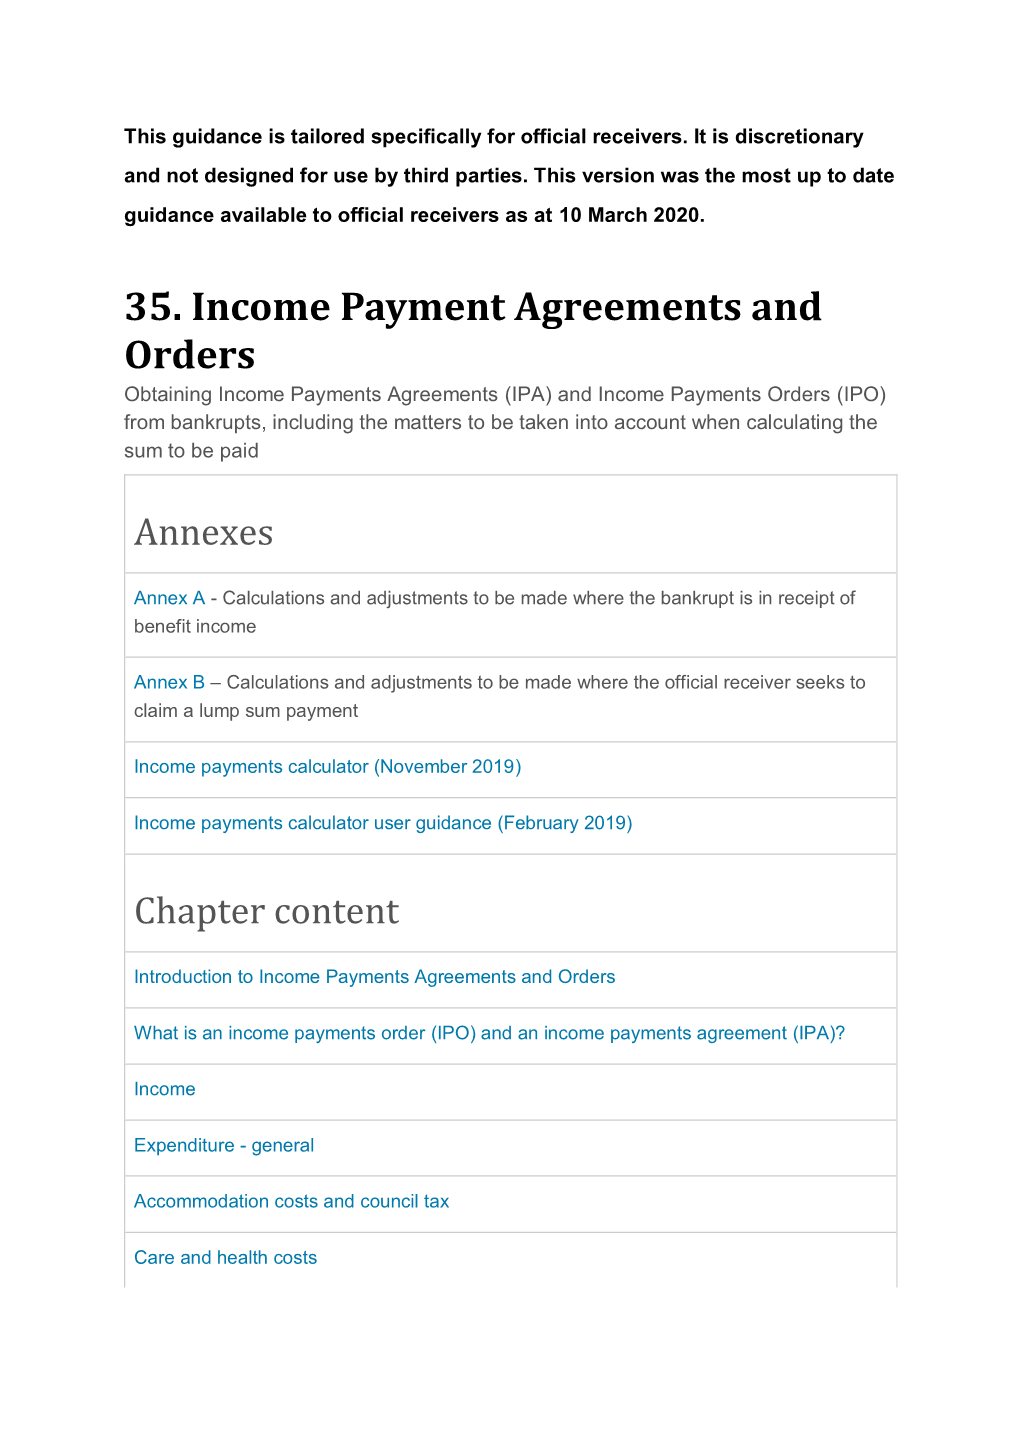 35. Income Payment Agreements and Orders